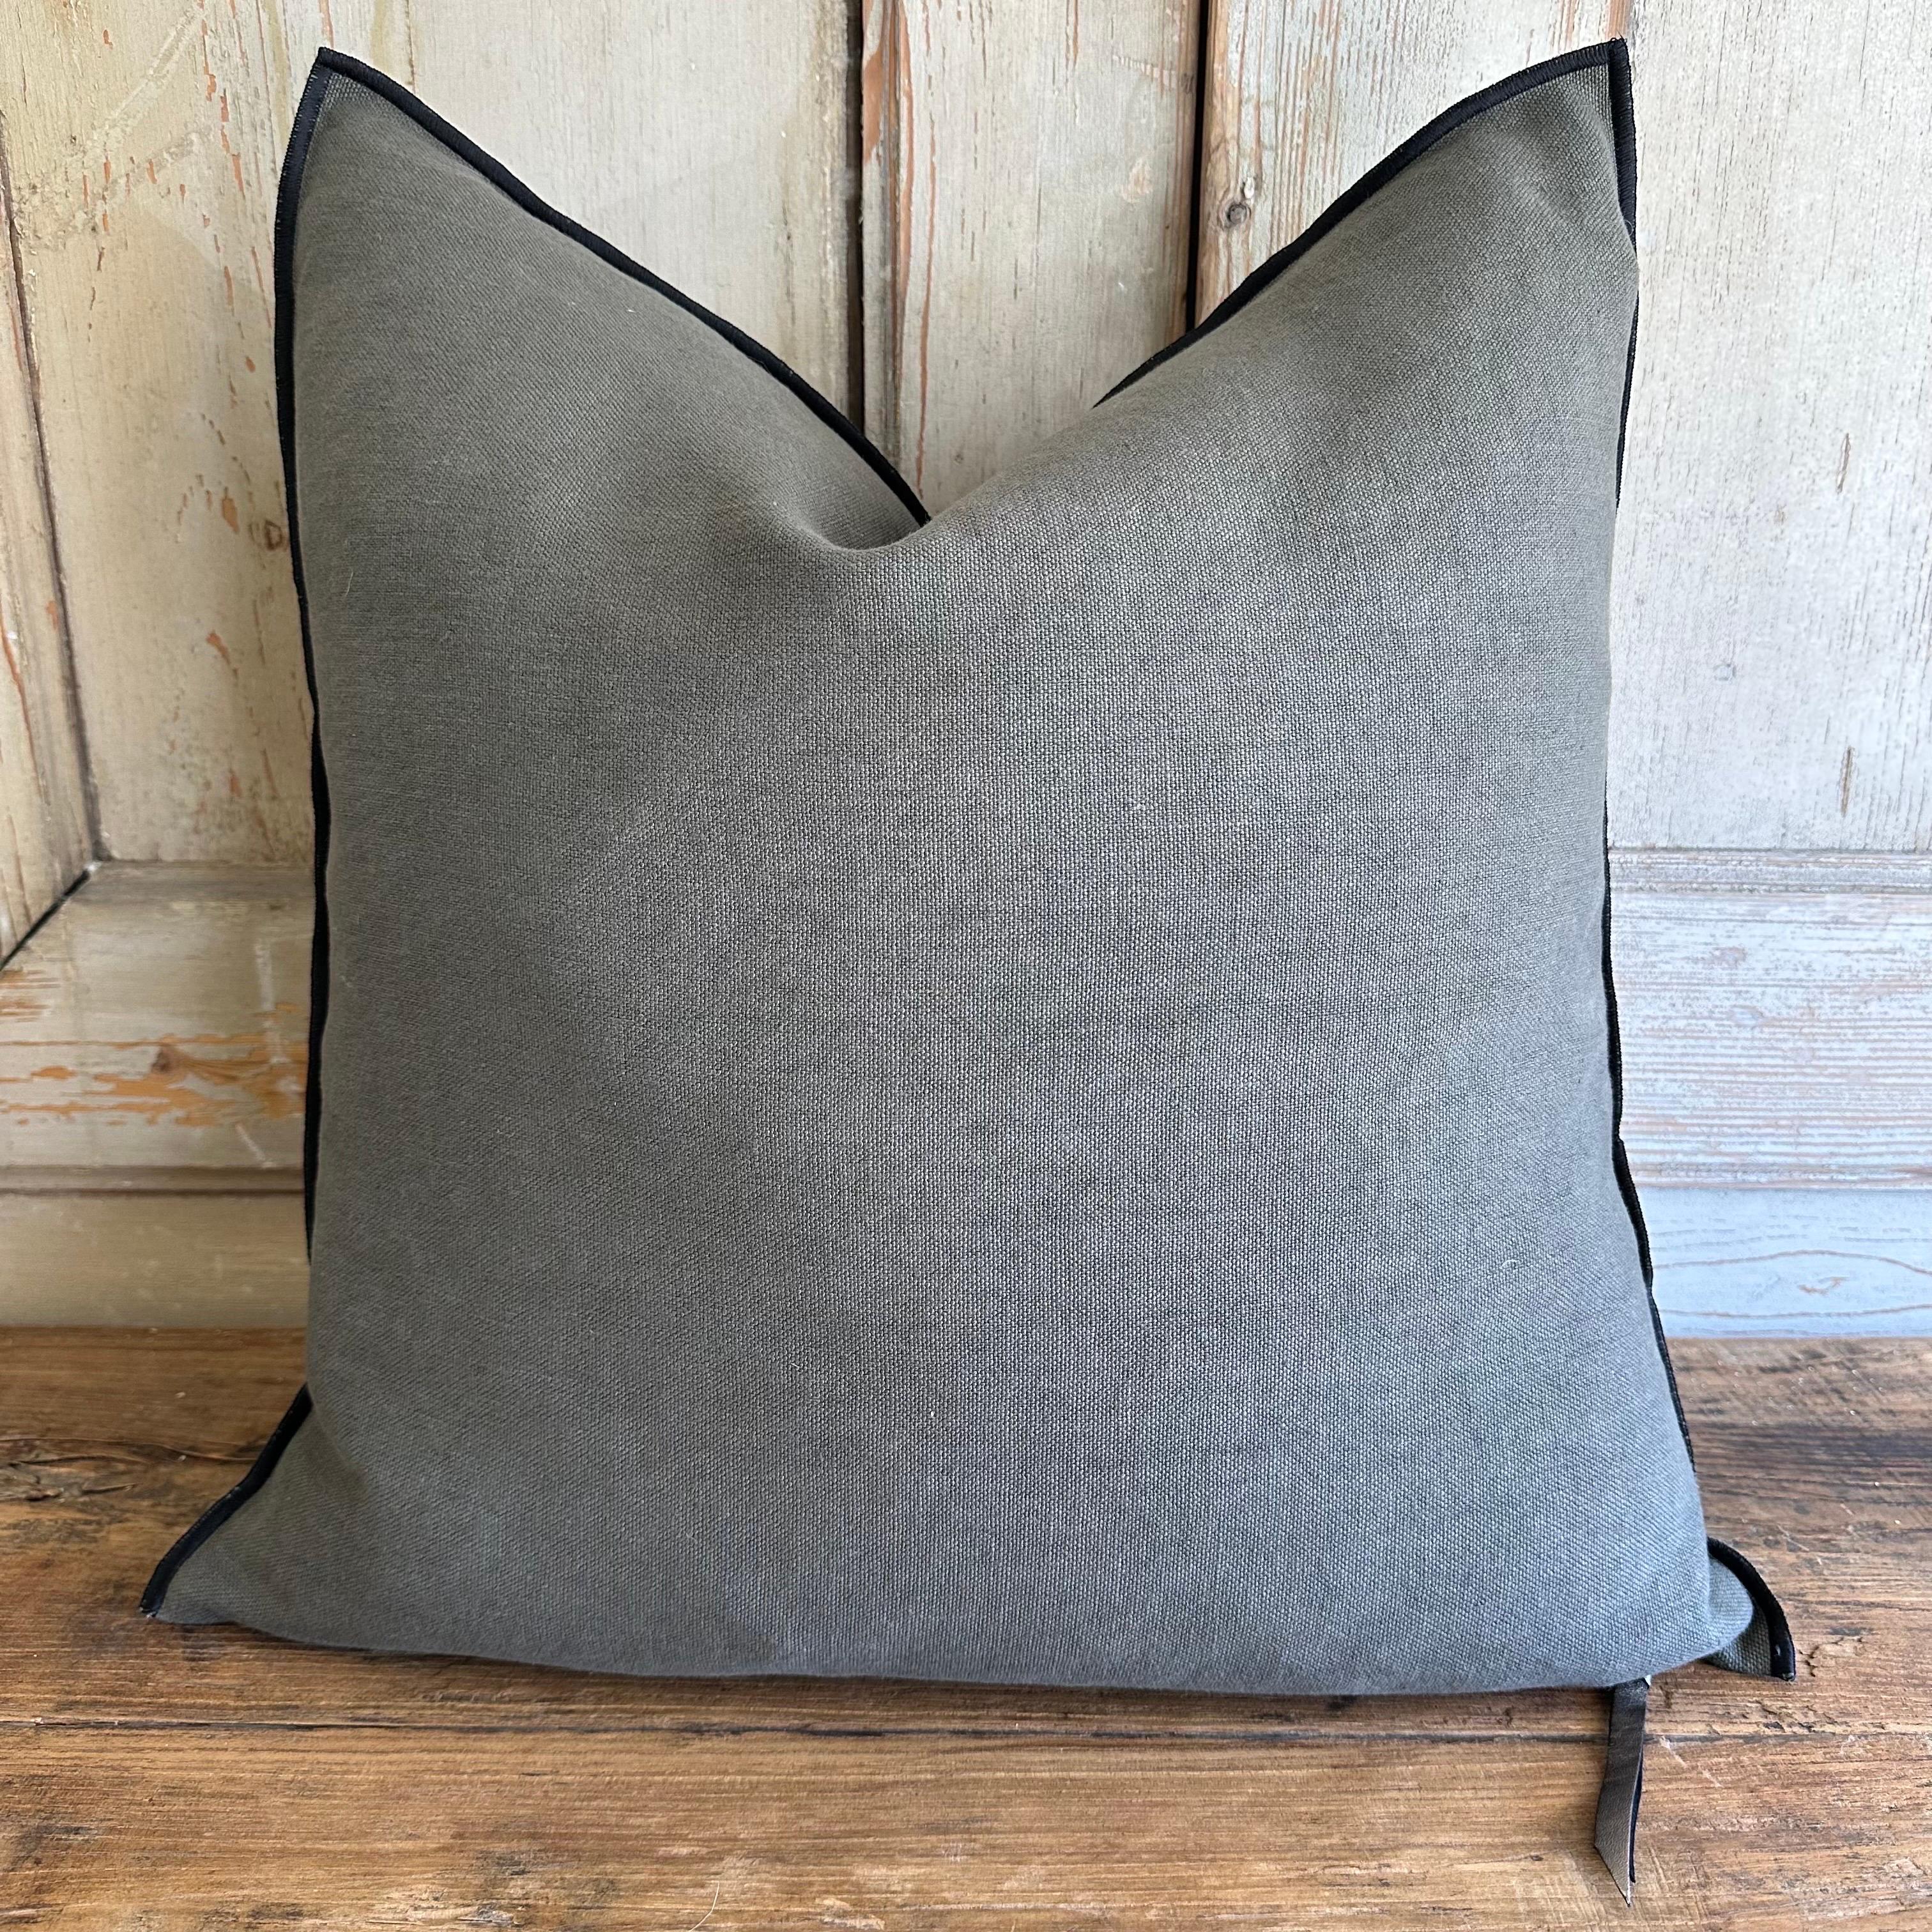 Custom linen blend accent pillow. 
Color: crocodile a deep green / grey colored nubby textured style pillow with a stitched edge, metal zipper closure. 
Includes down / feather insert 
Our pillows are constructed with vintage one of a kind